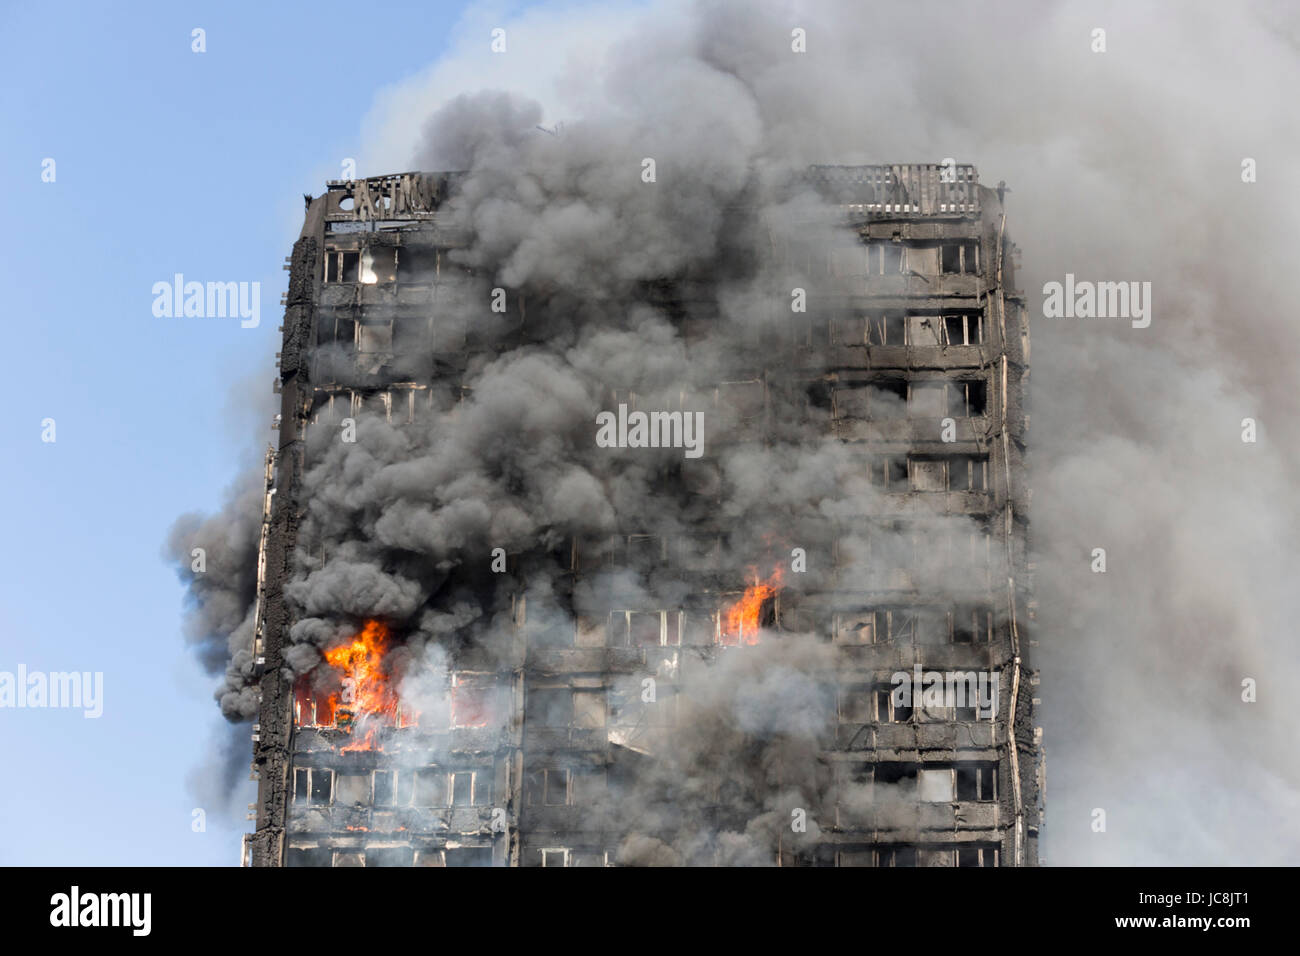 London, UK. 14th June, 2017. Fire is still burning inside the tower at 9am. At least 50 people have been taken to five hospitals for treatment as hundreds of residents in the 24-storey, 120 flat, Grenfell Tower in North Kensington have been evacuated from their flats in the building that caught fire just after 1.15am. Many casualties are expected. Credit: Bettina Strenske/Alamy Live News Stock Photo